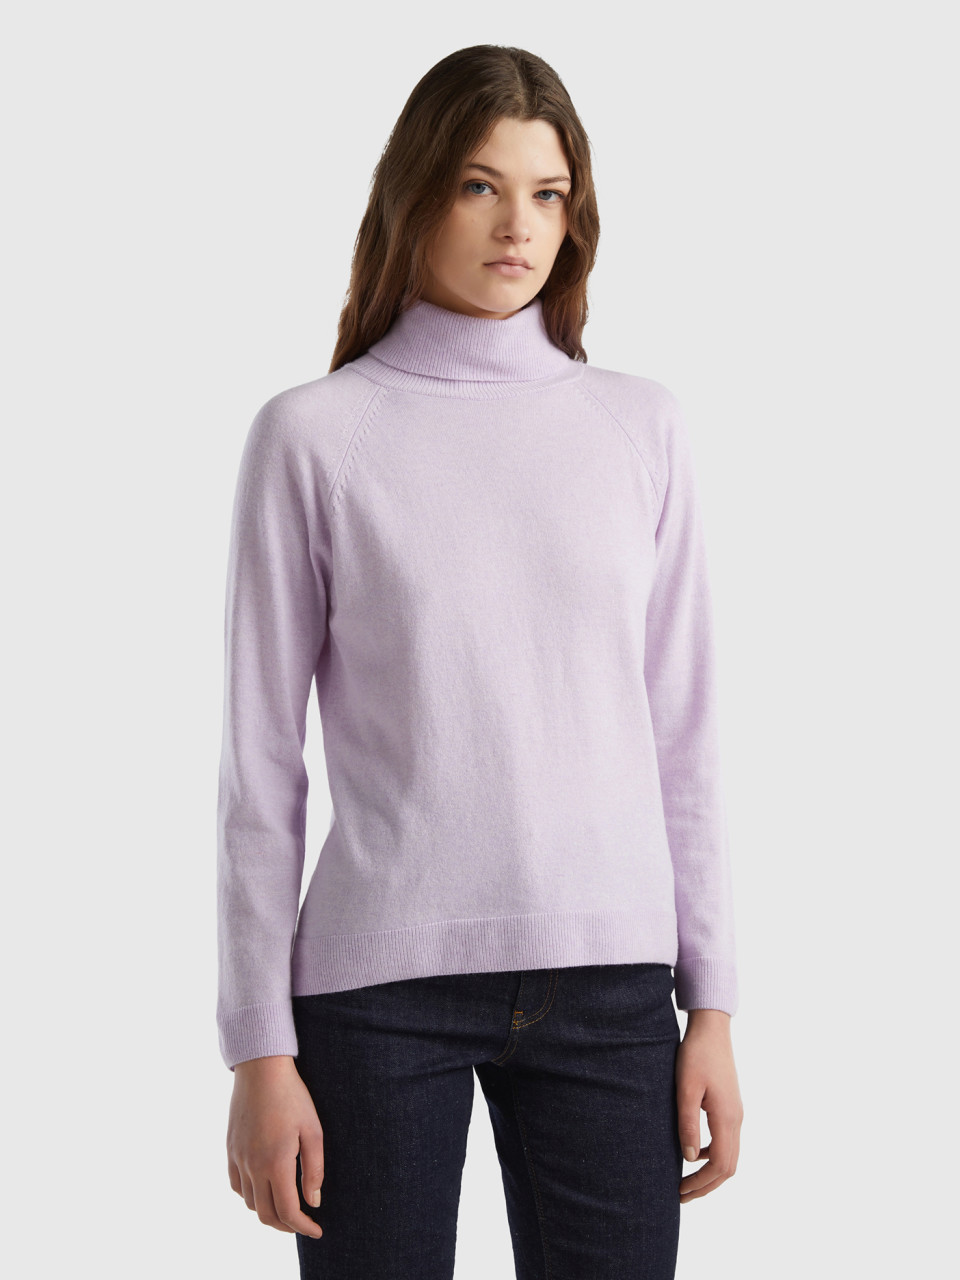 Benetton, Light Lilac Turtleneck Sweater In Cashmere And Wool Blend, Lilac, Women